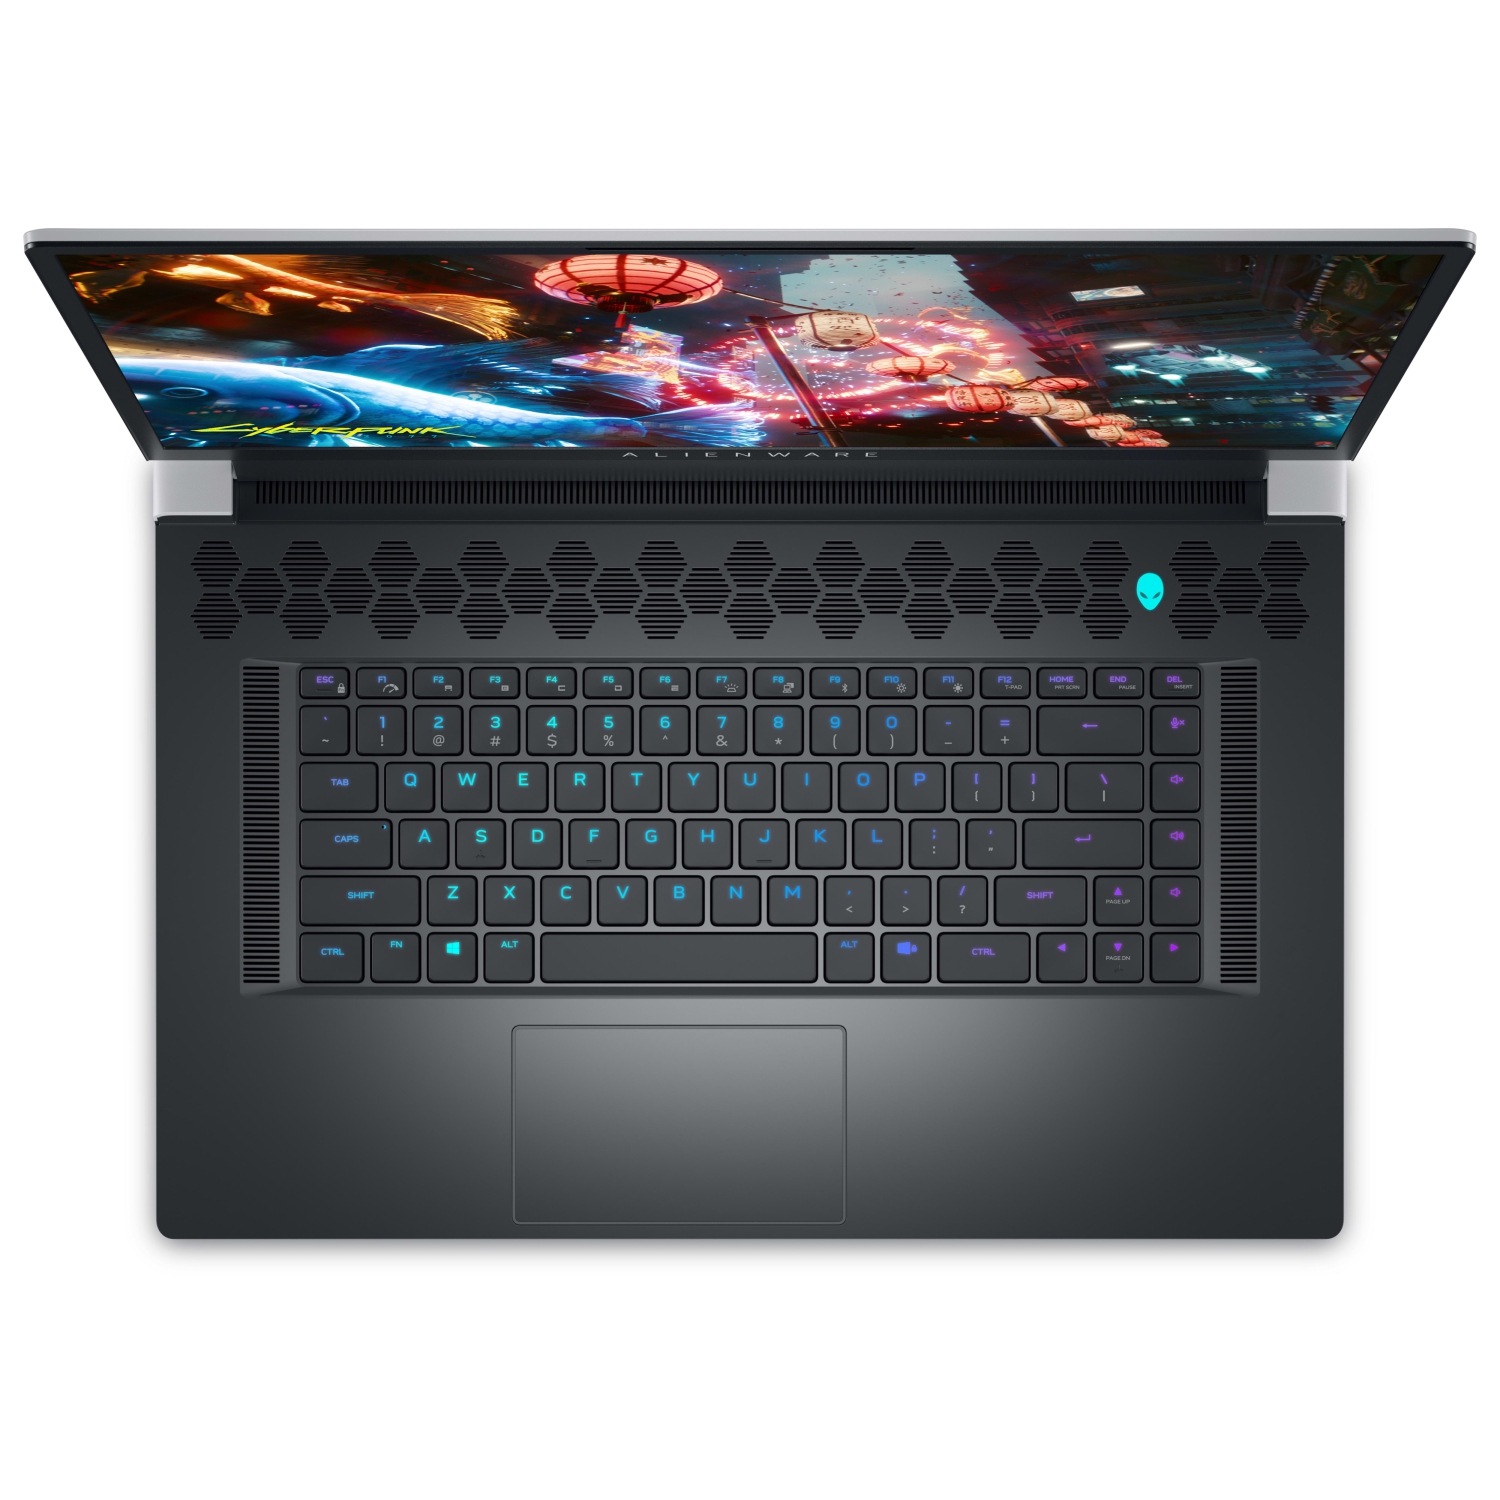 Refurbished (Excellent) – Dell Alienware X17 R2 Gaming Laptop (2022) | 17.3" FHD | Core i7 - 512GB SSD - 32GB RAM - 3080 Ti | 14 Cores @ 4.7 GHz - 12th Gen CPU - 16GB GDDR6X